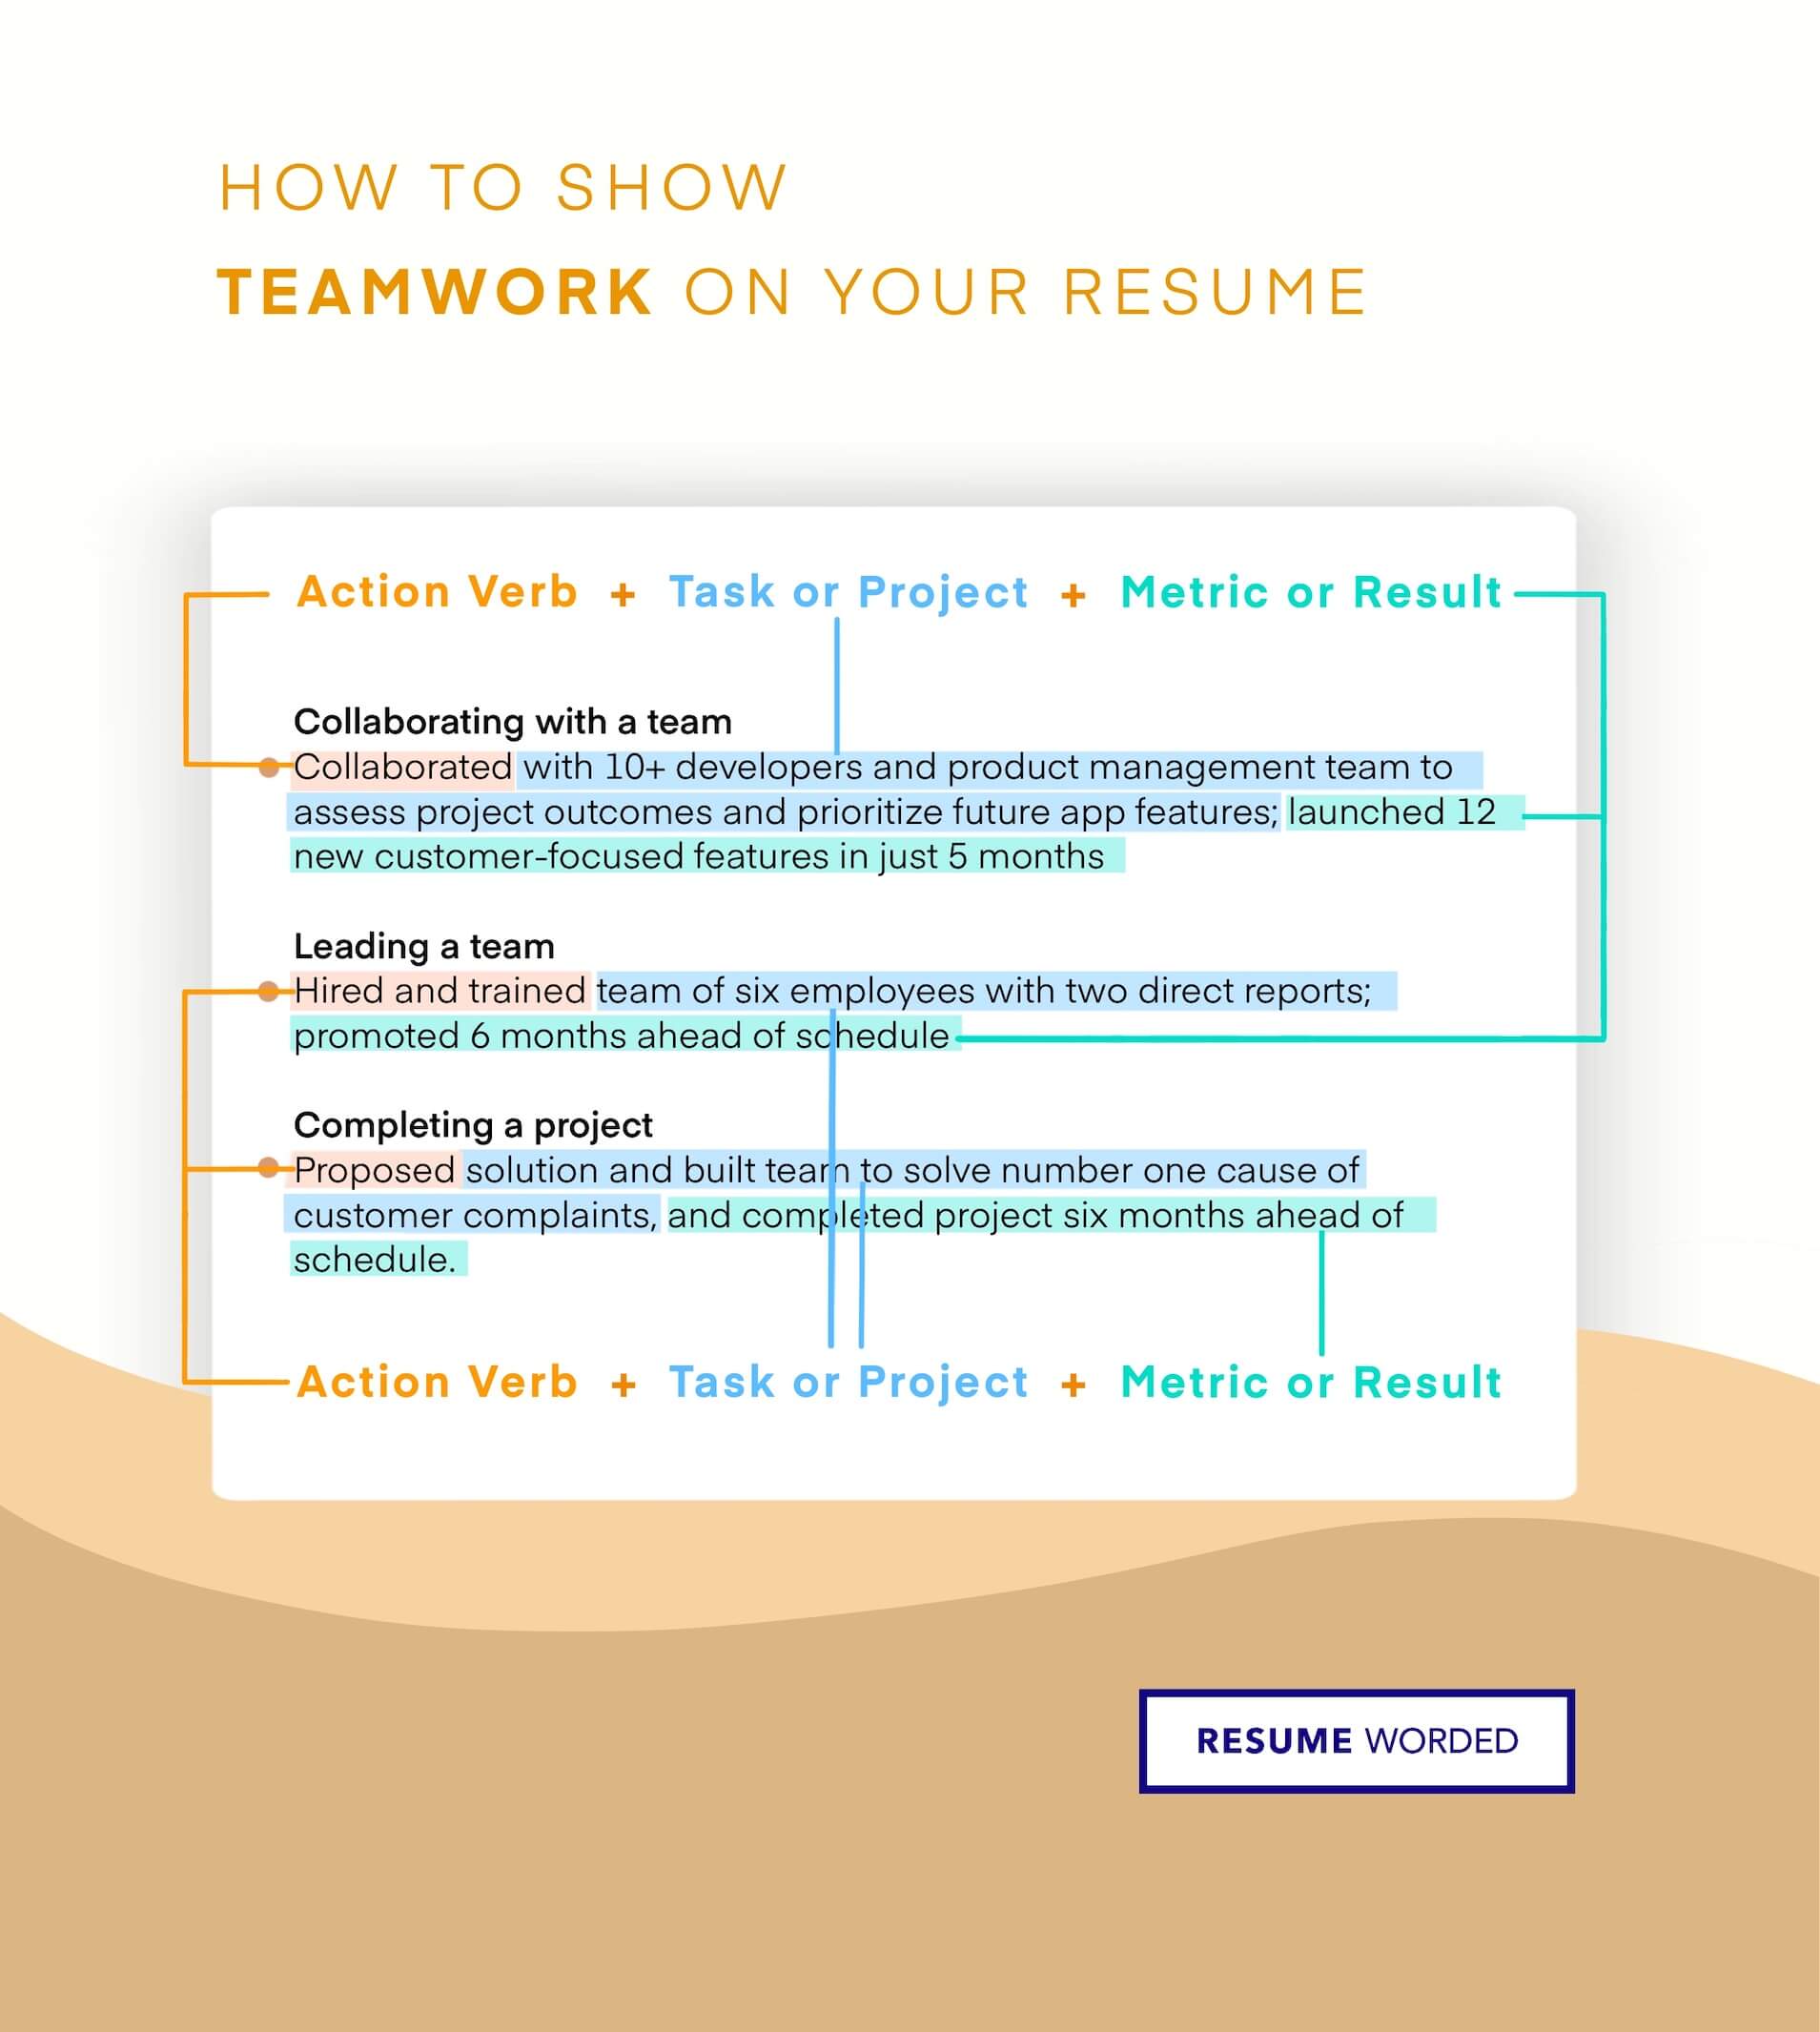 Demonstrate leadership and team collaboration - Head of Product Resume